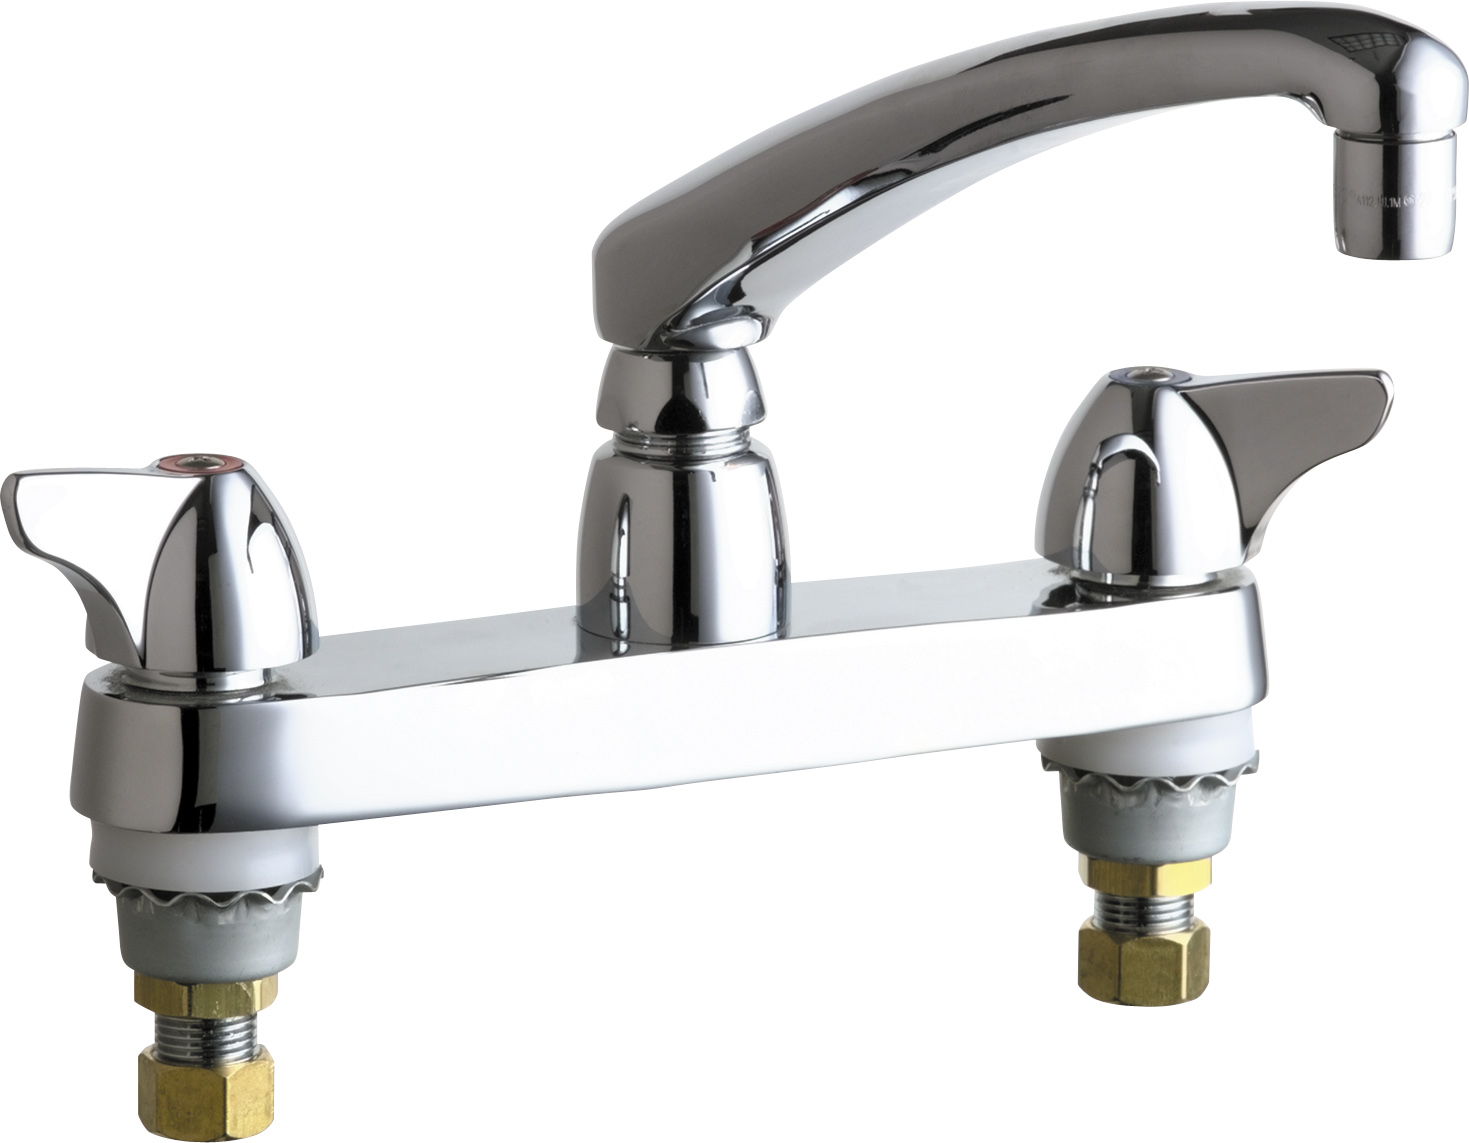 Deck Mounted Manual Sink Faucet With 8 Centers Chicago Faucets